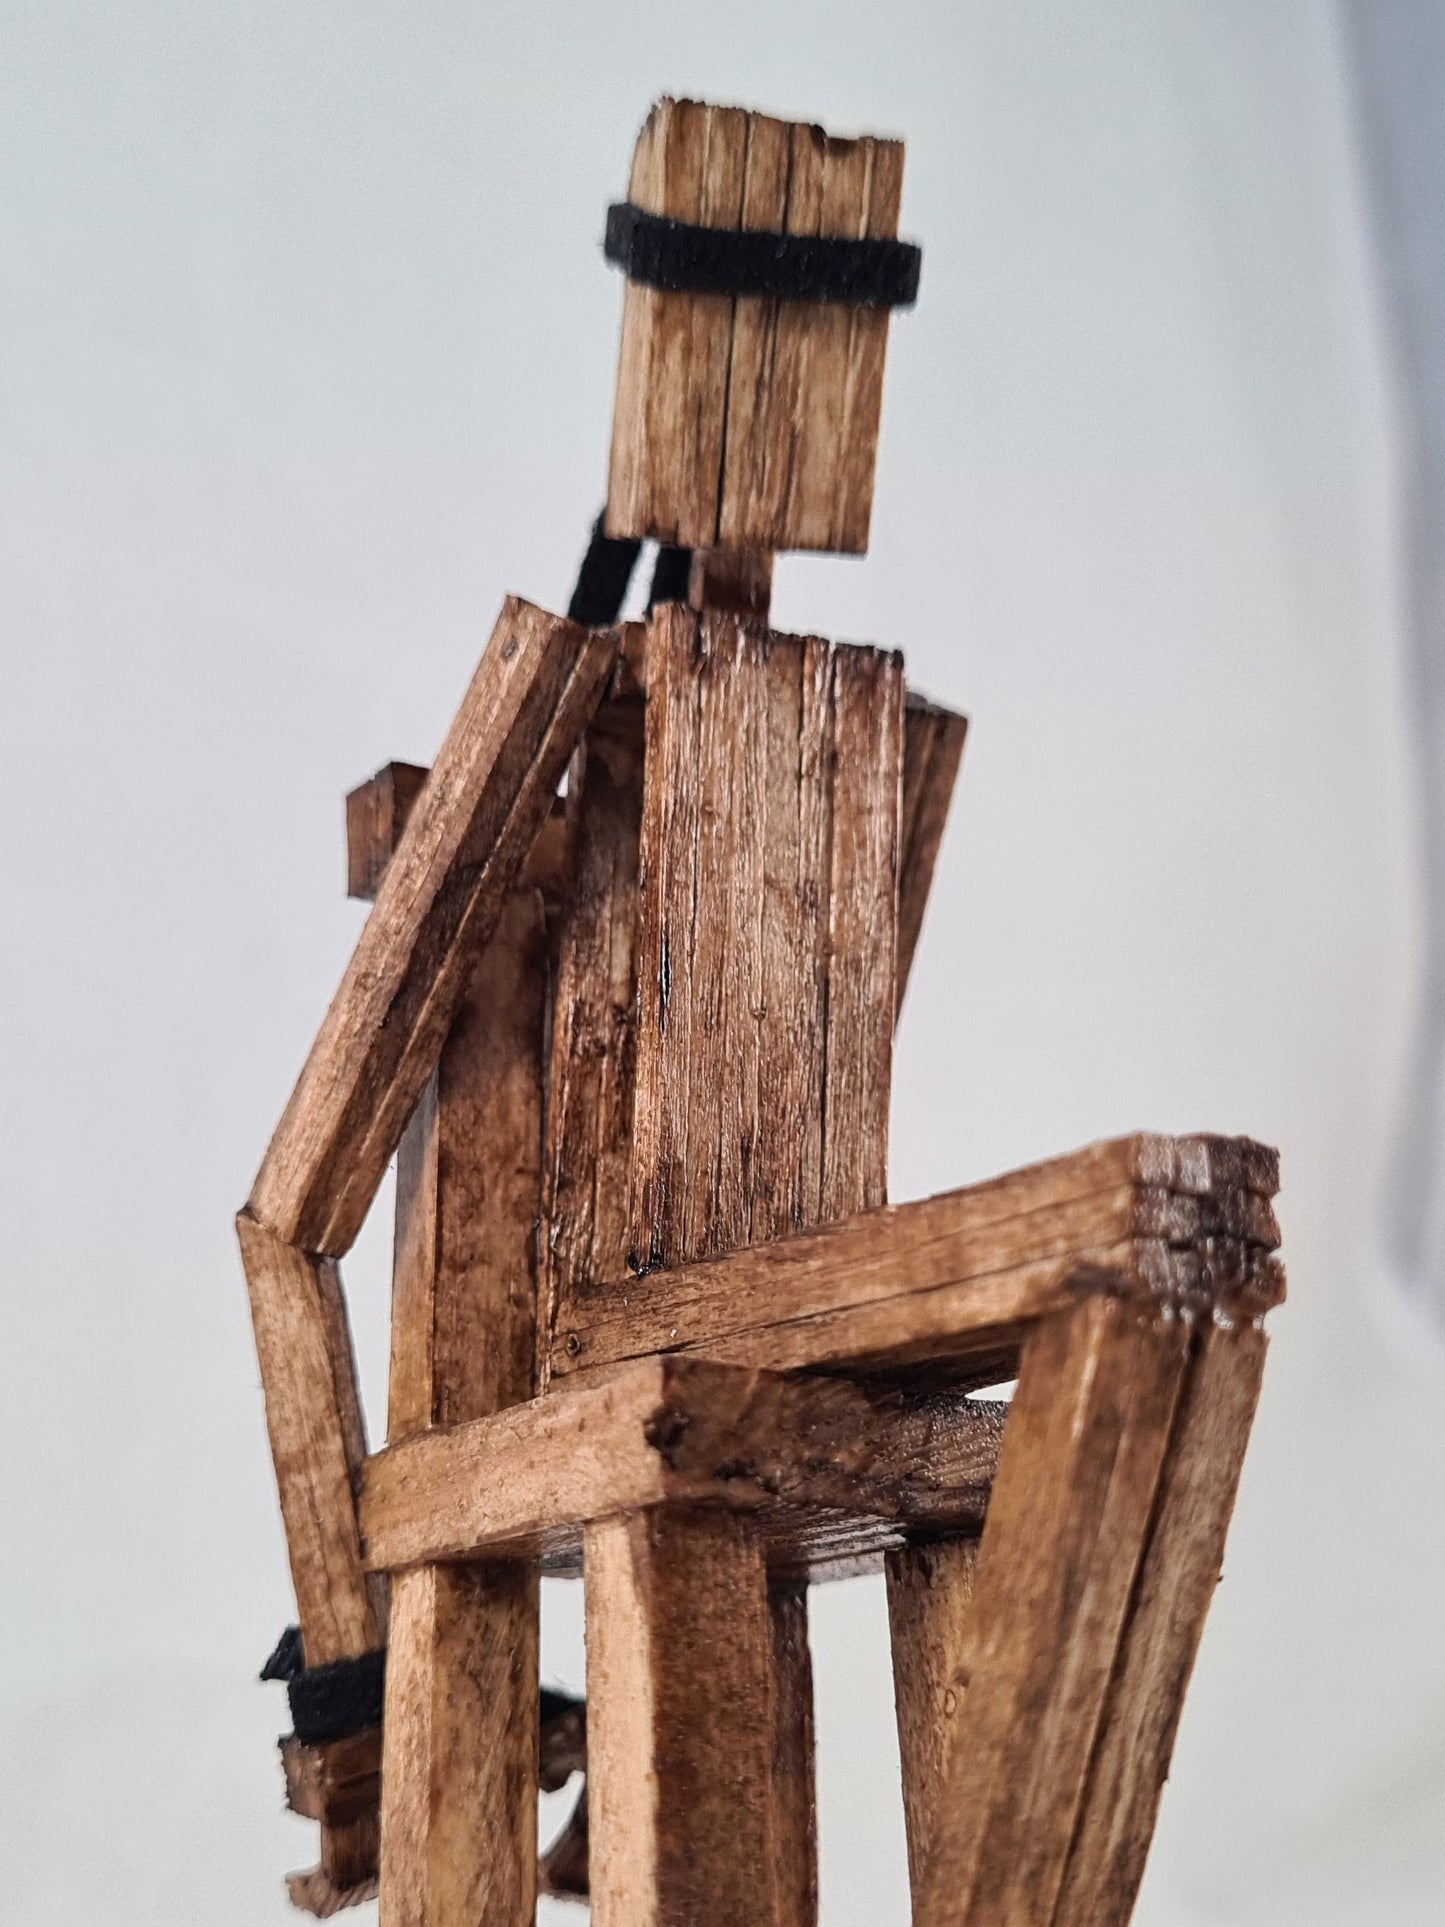 Desire Untethered - Handcrafted Wooden Matchstick Figures - Gifts, Ornaments and Decor By Tiggidy Designs